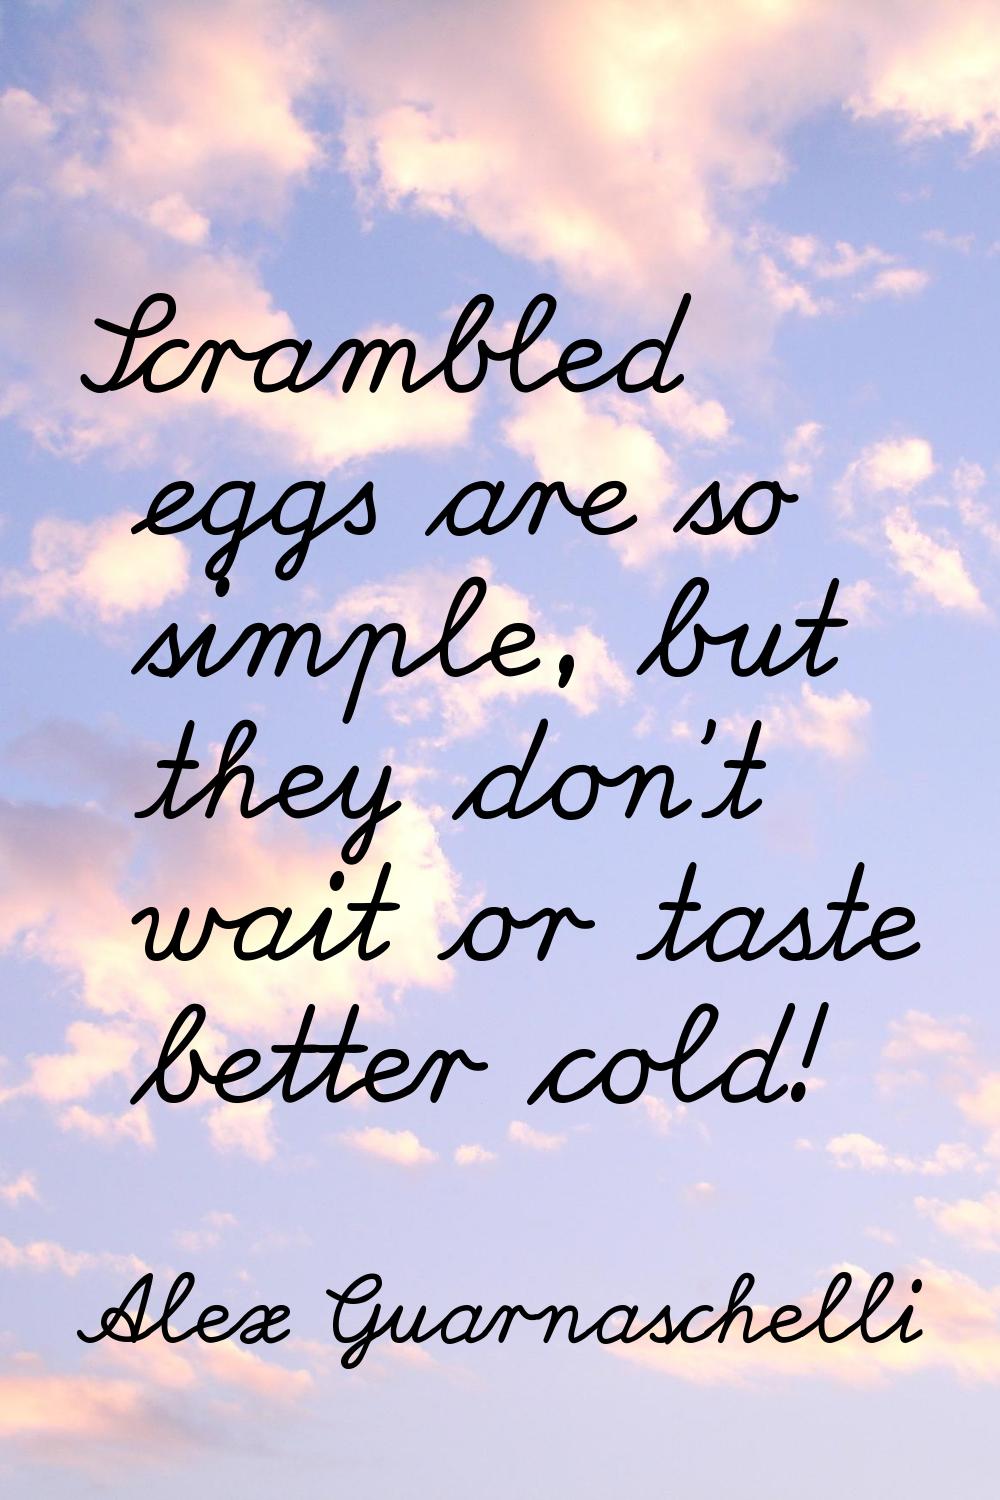 Scrambled eggs are so simple, but they don't wait or taste better cold!